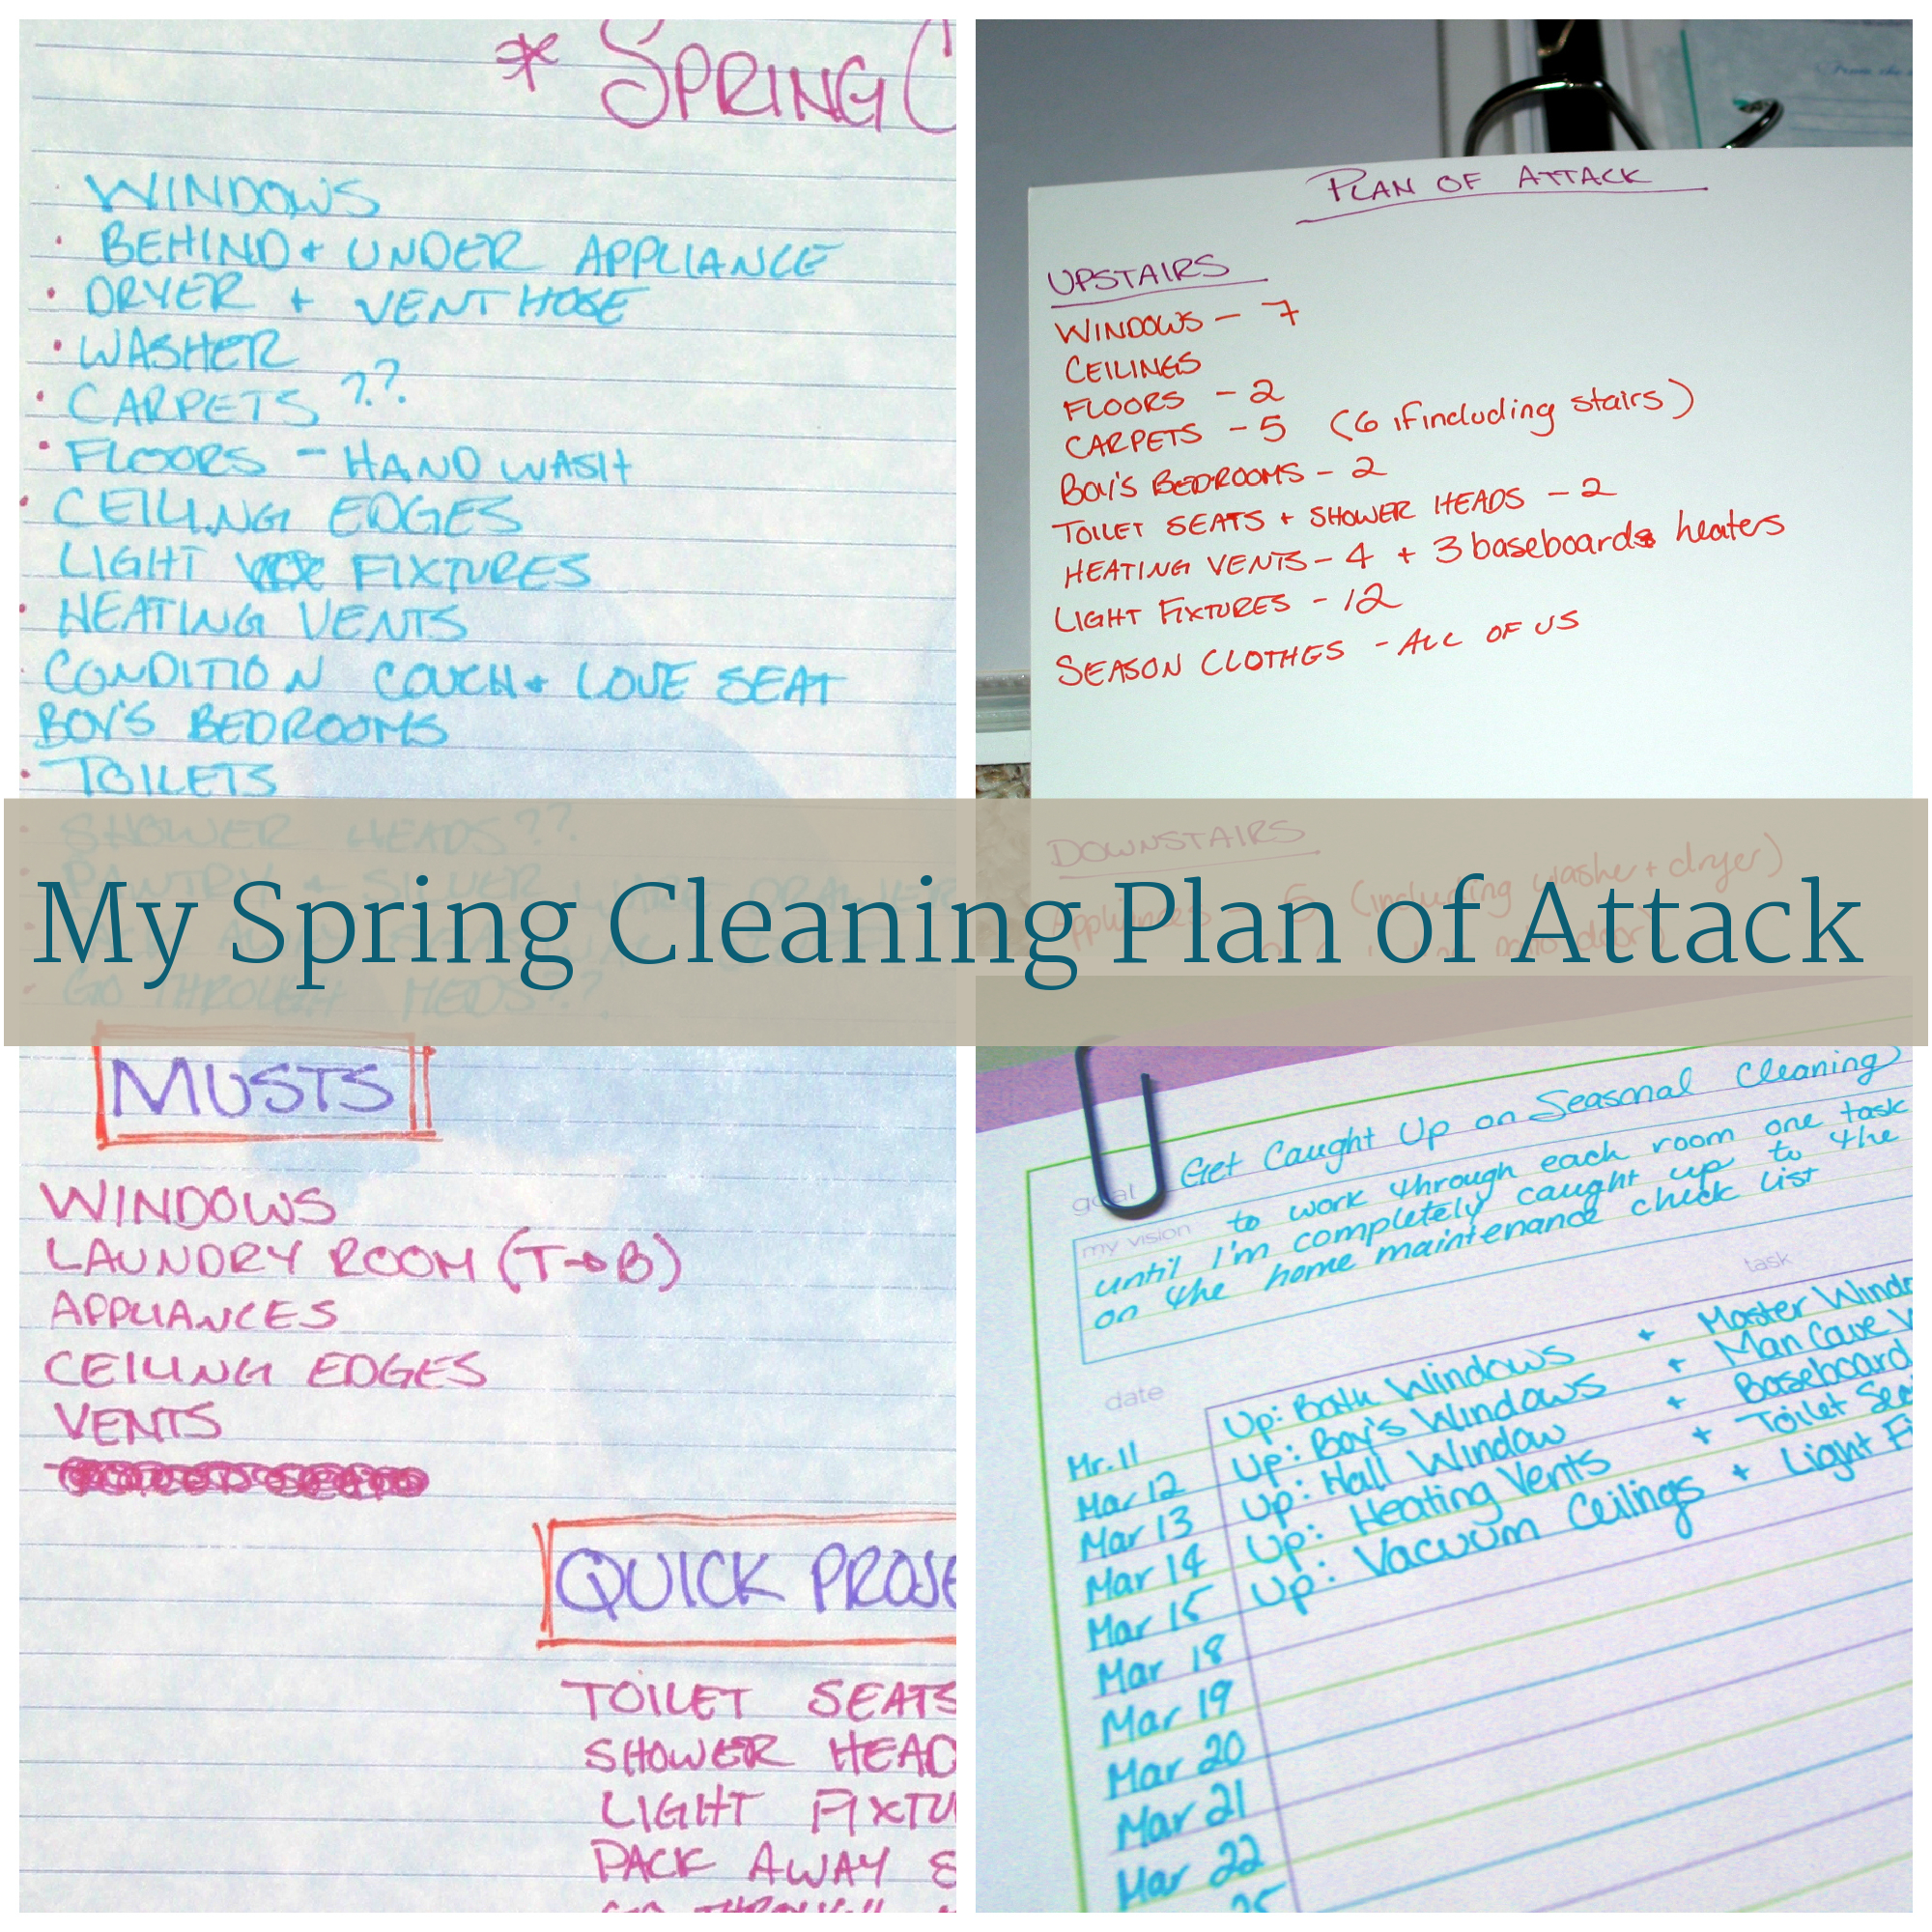 My Spring Cleaning Plan of Attack